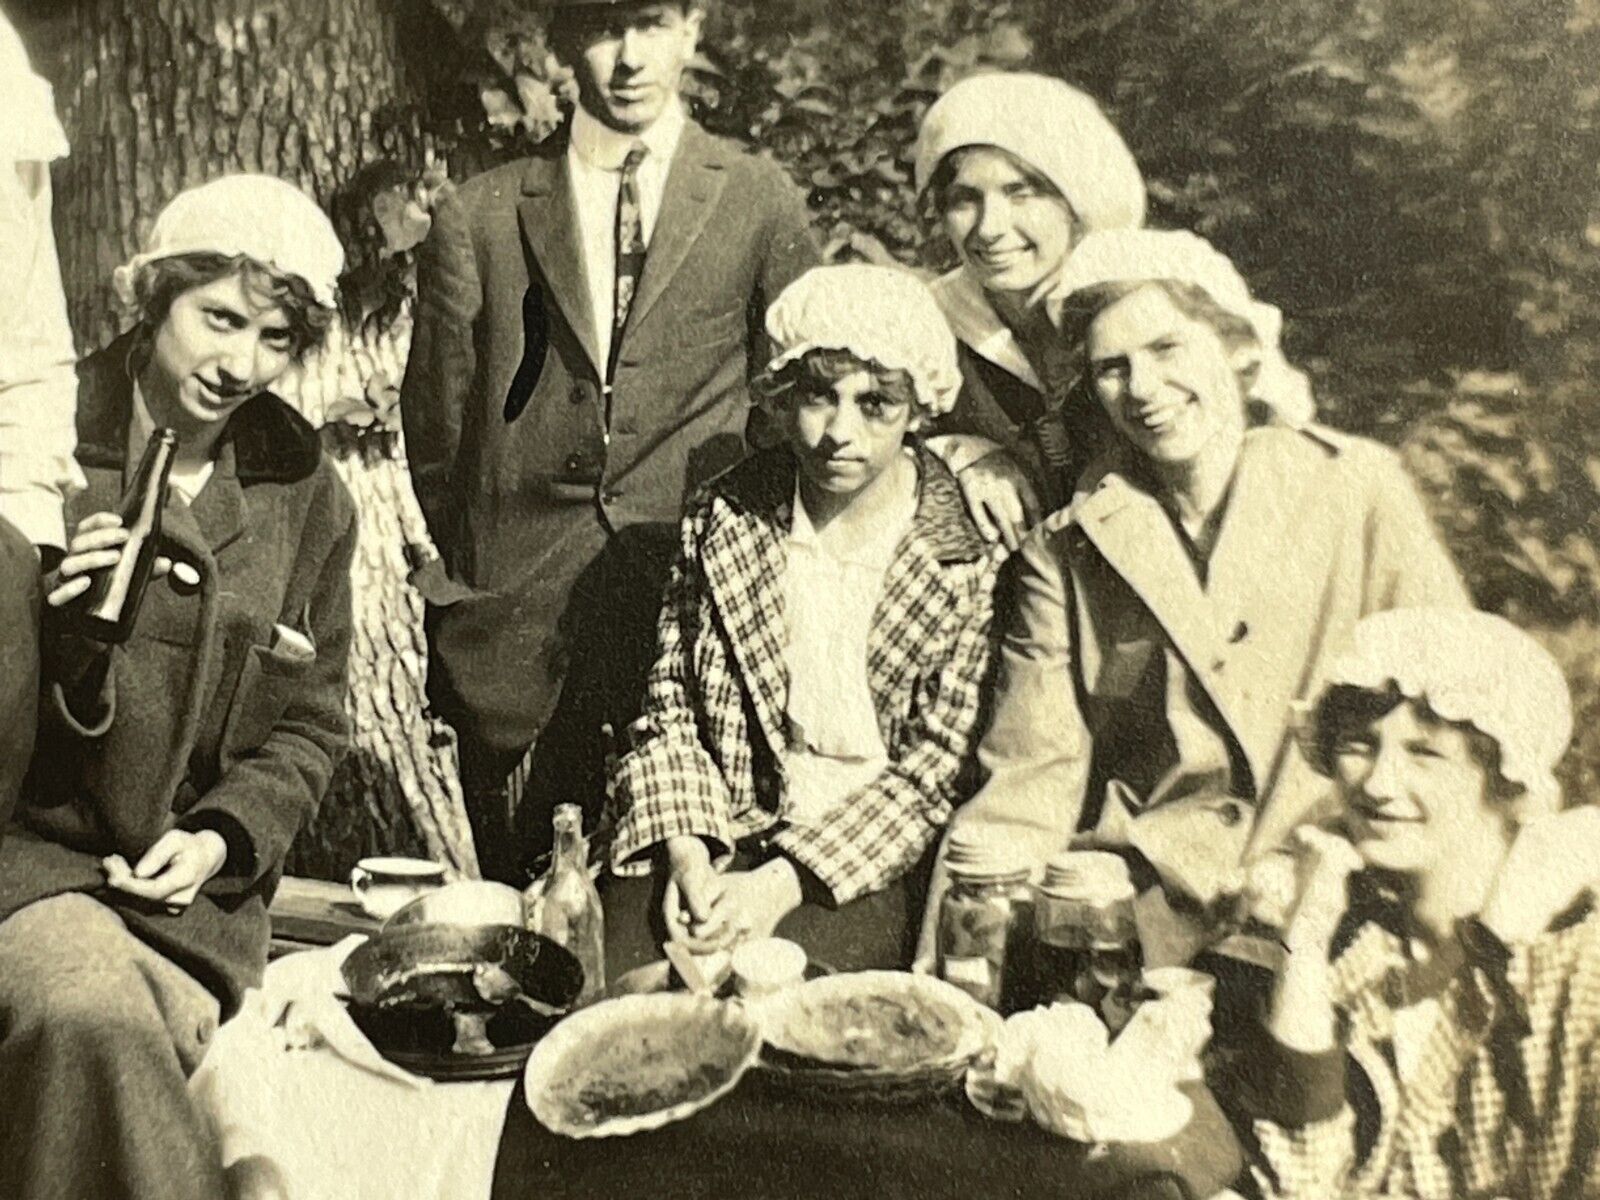 O8 Photograph 1910's Group Drinking Bottle Women Bonnets Party Picnic Style